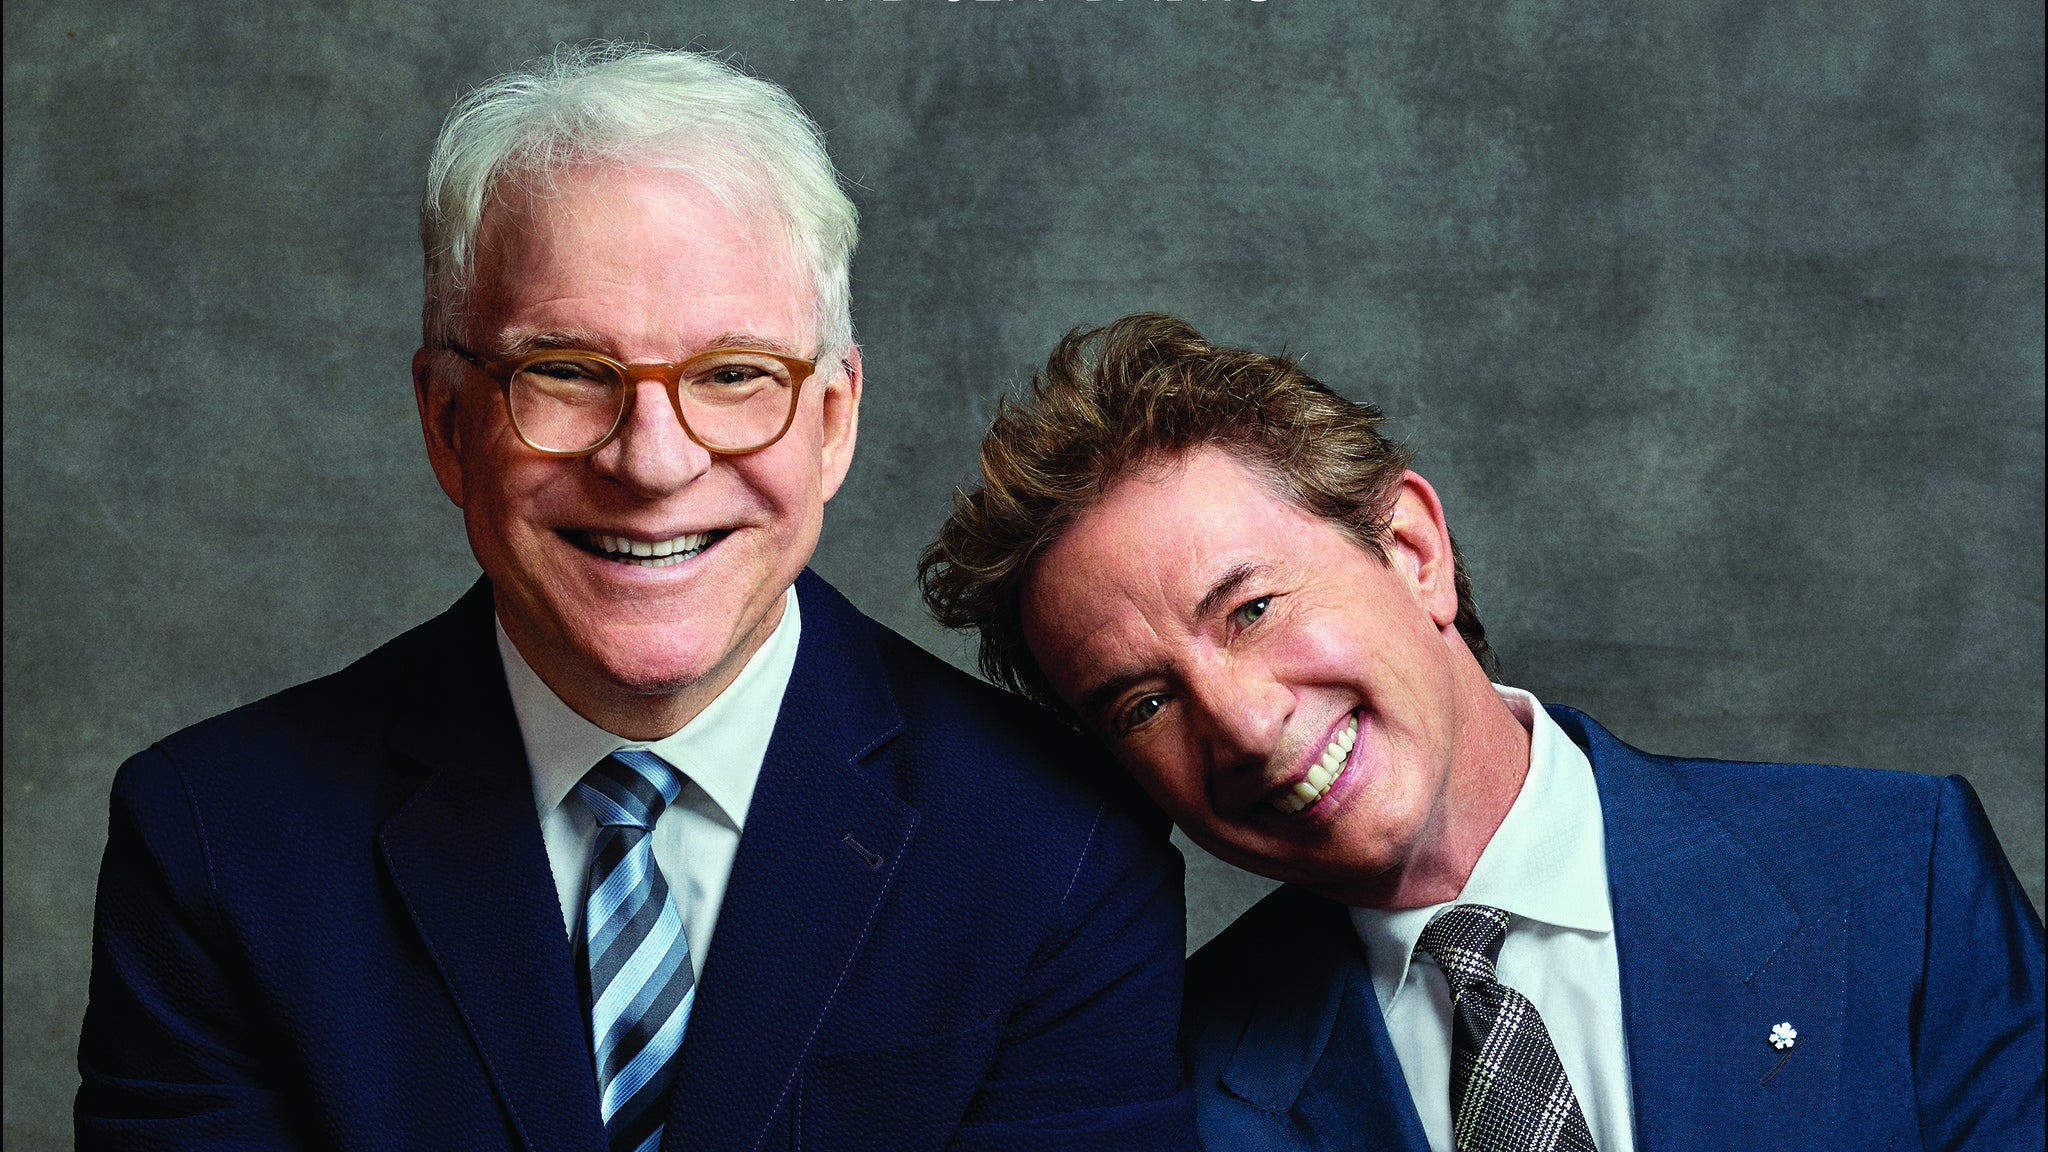 celebrities who are good people - steve martin and martin short - www